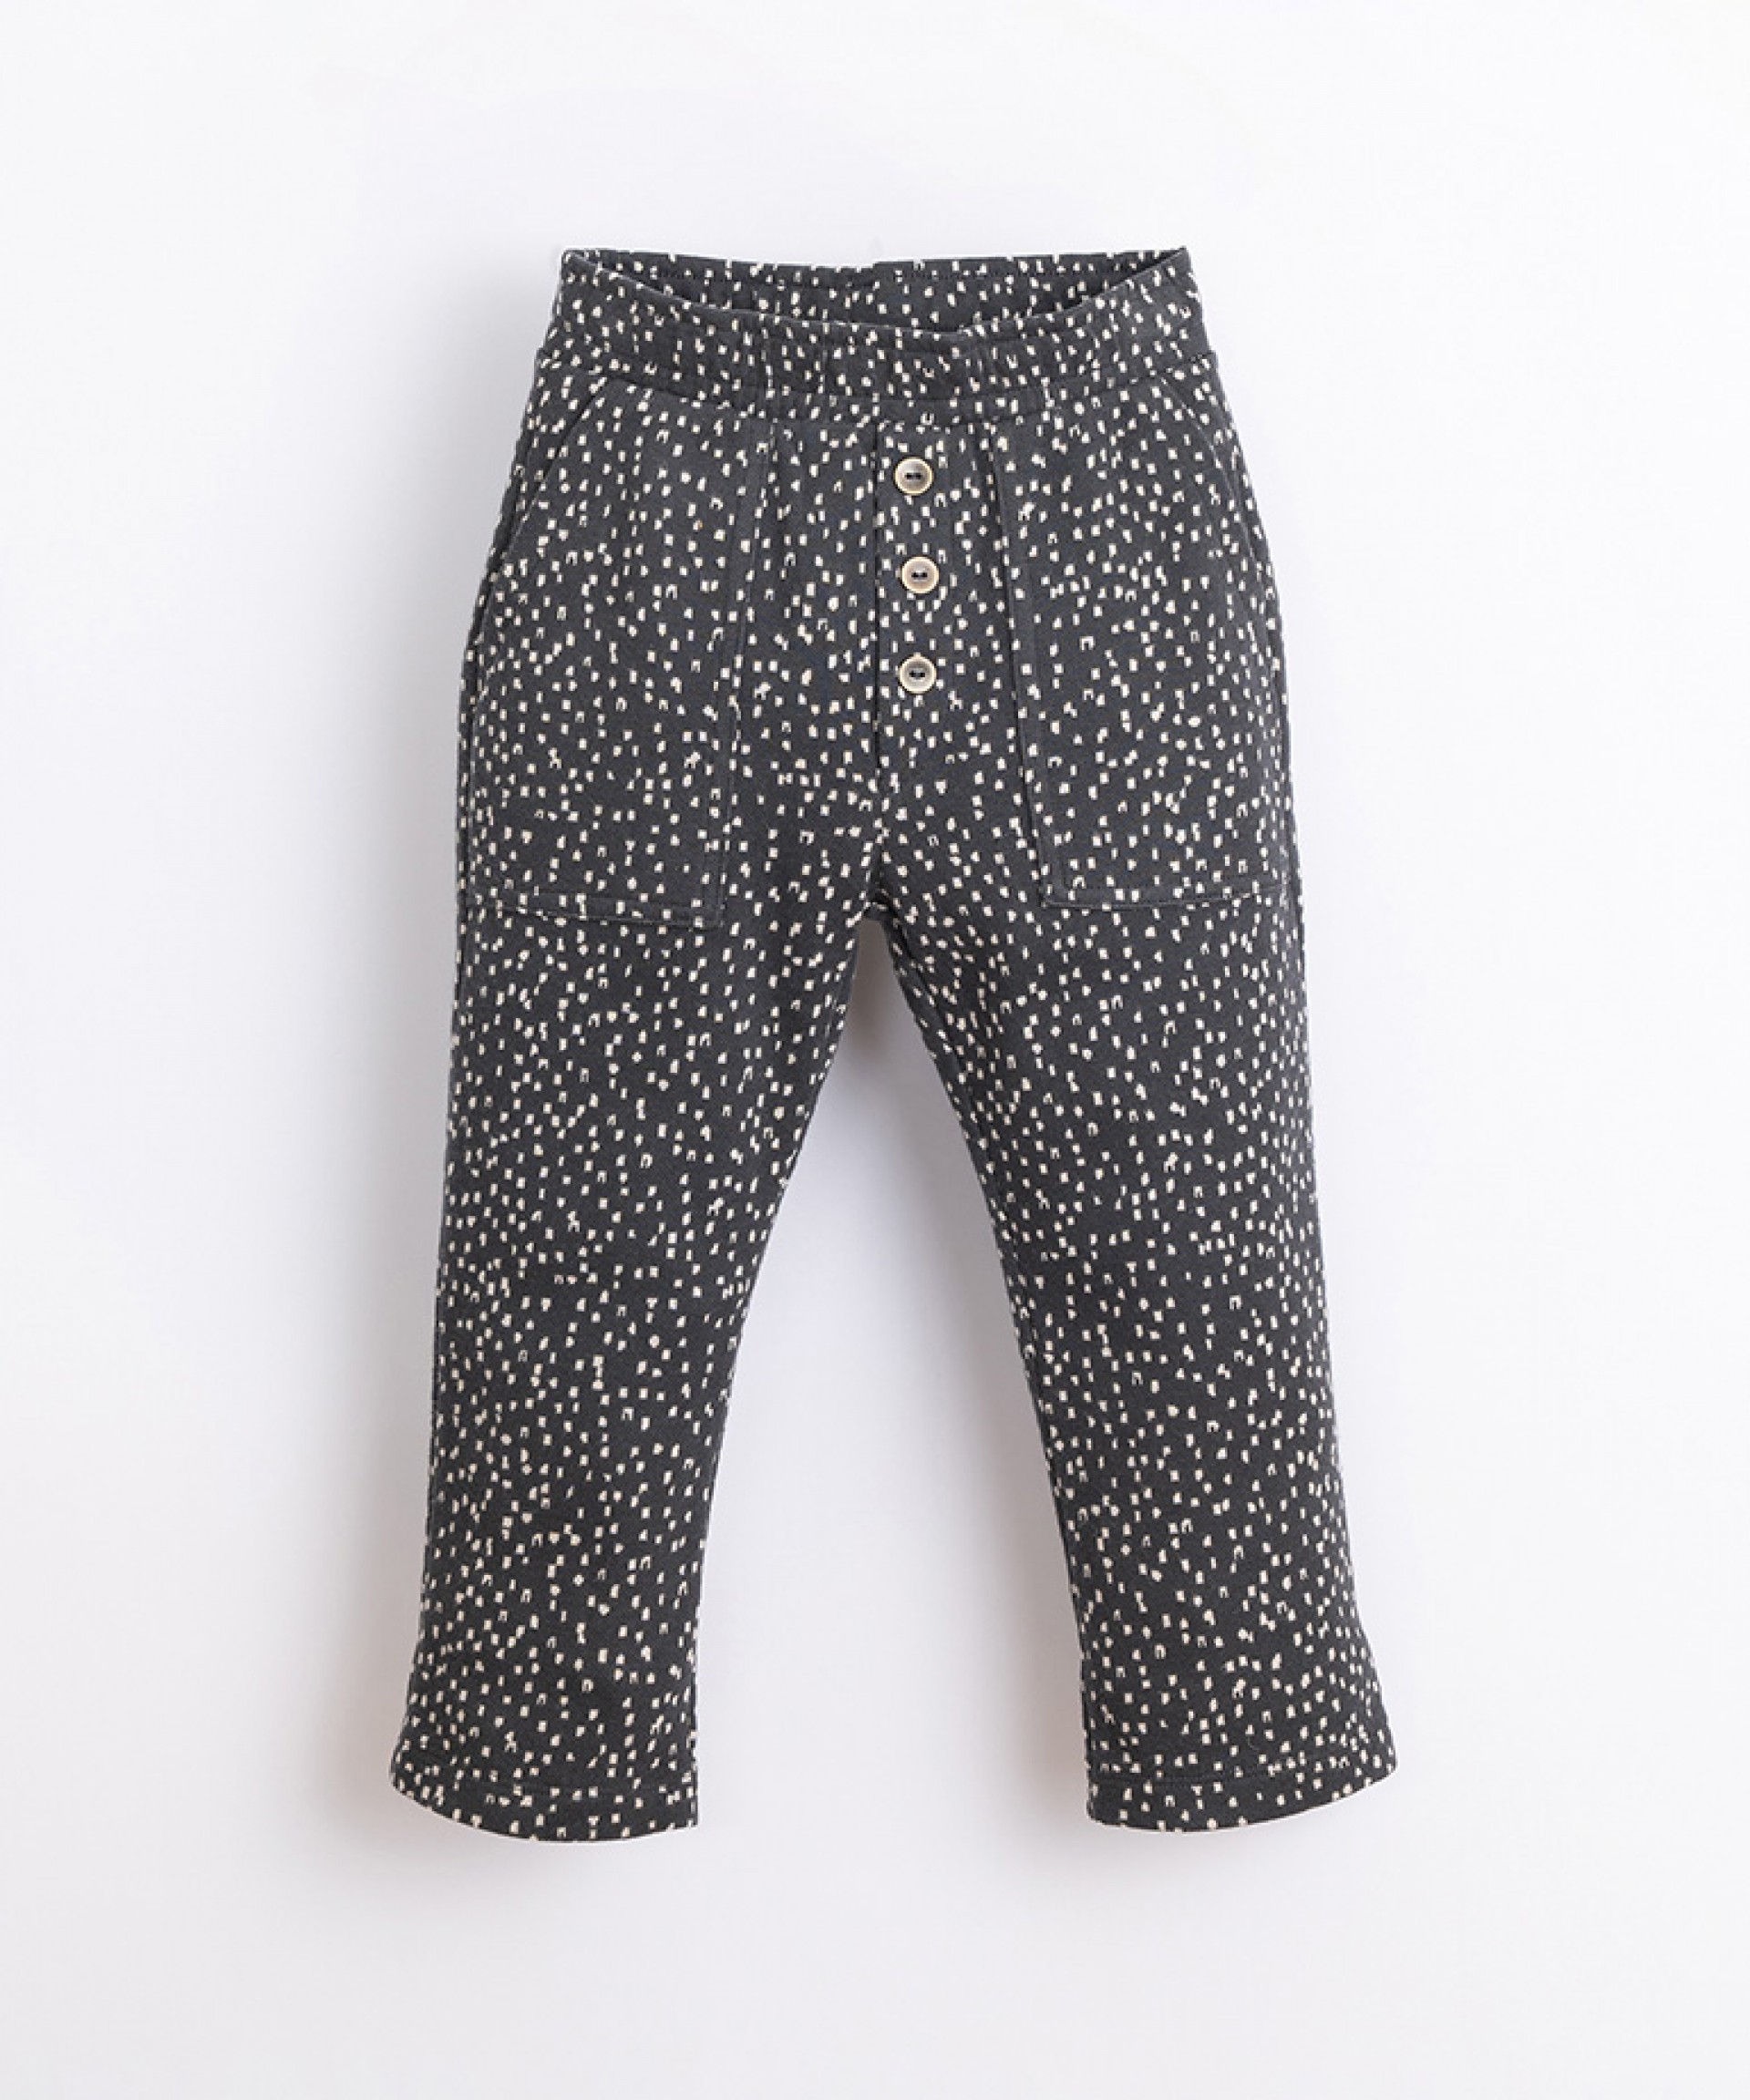 Organic cotton trousers with a pattern | Illustration